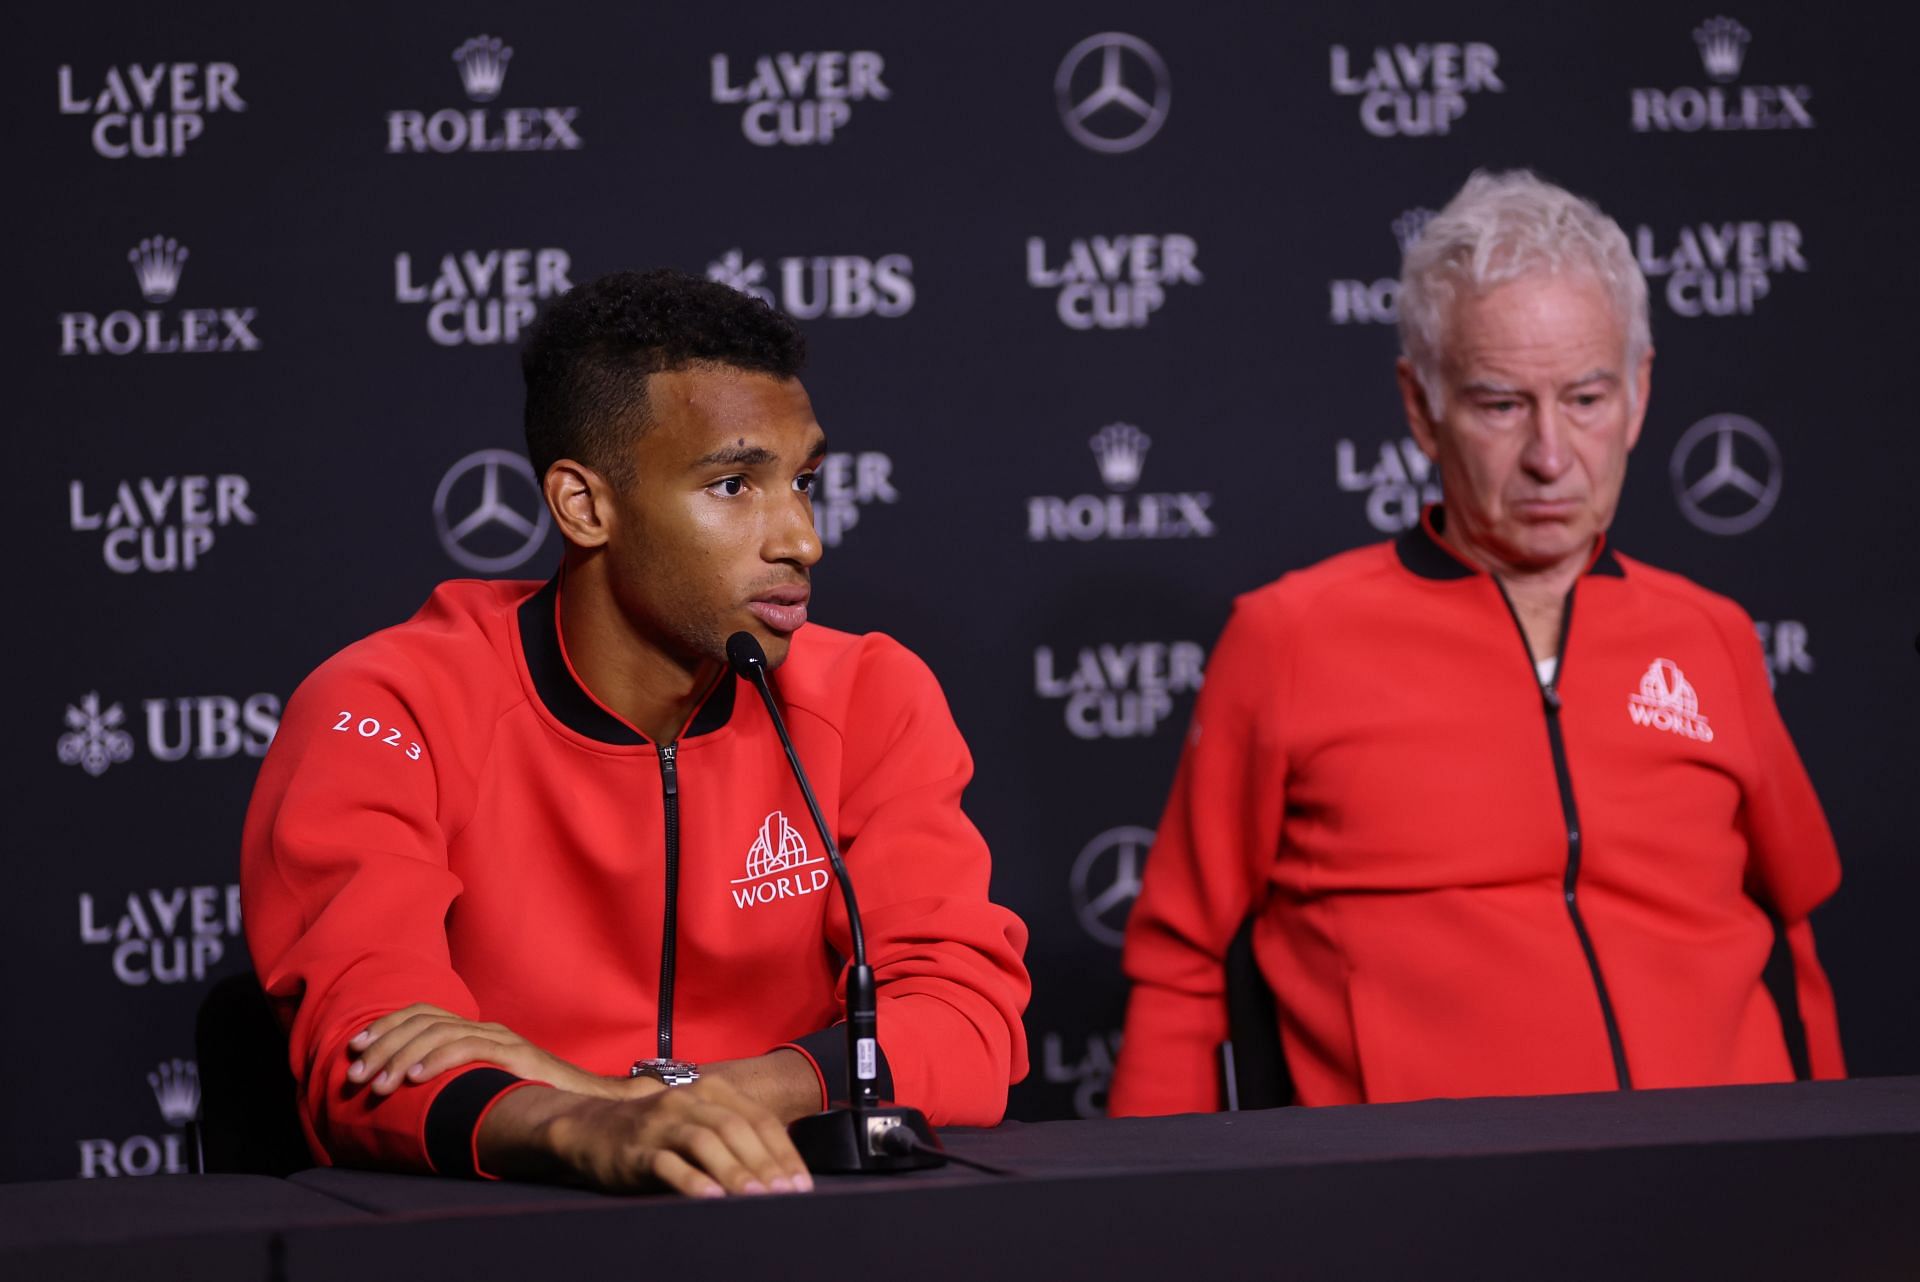 John McEnroe with Felix Auger-Aliassime at the Laver Cup